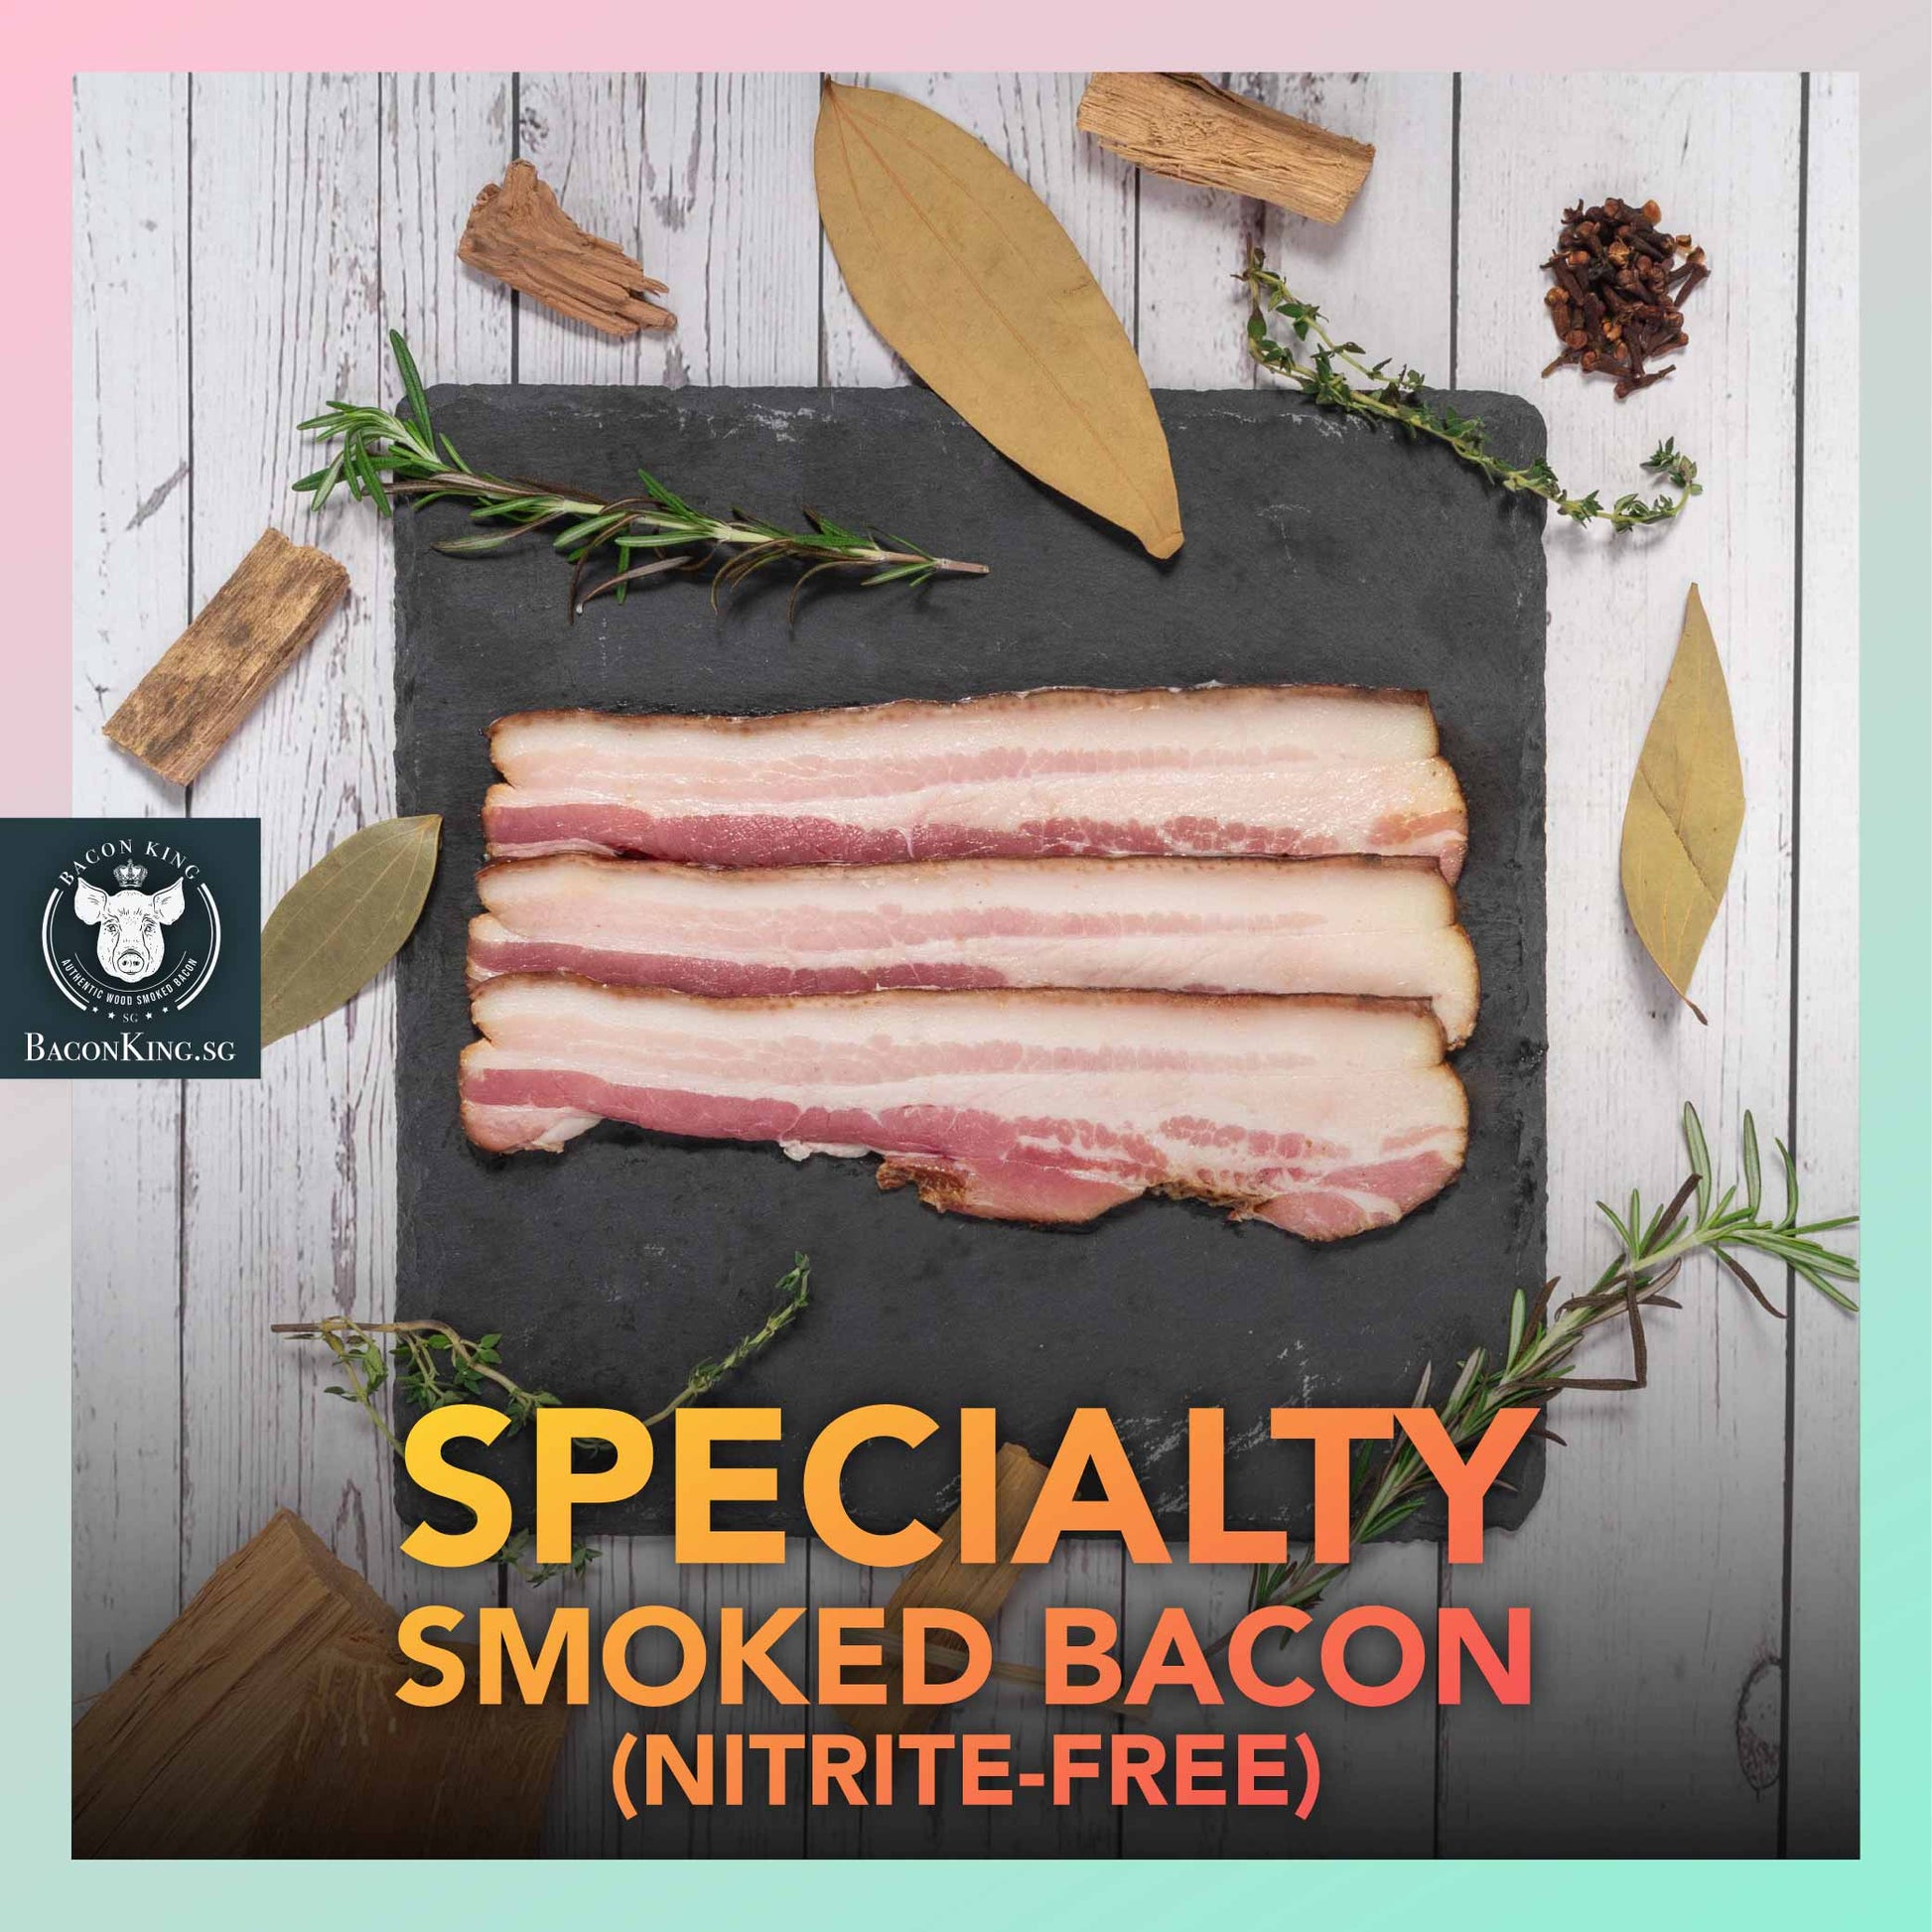 Slices of Nitrite-free Specialty Smoked Bacon on Stone Plate with Bay Leaves, Rosemary, Thyme, Cloves, Applewood chips decorating the side, against a marble background